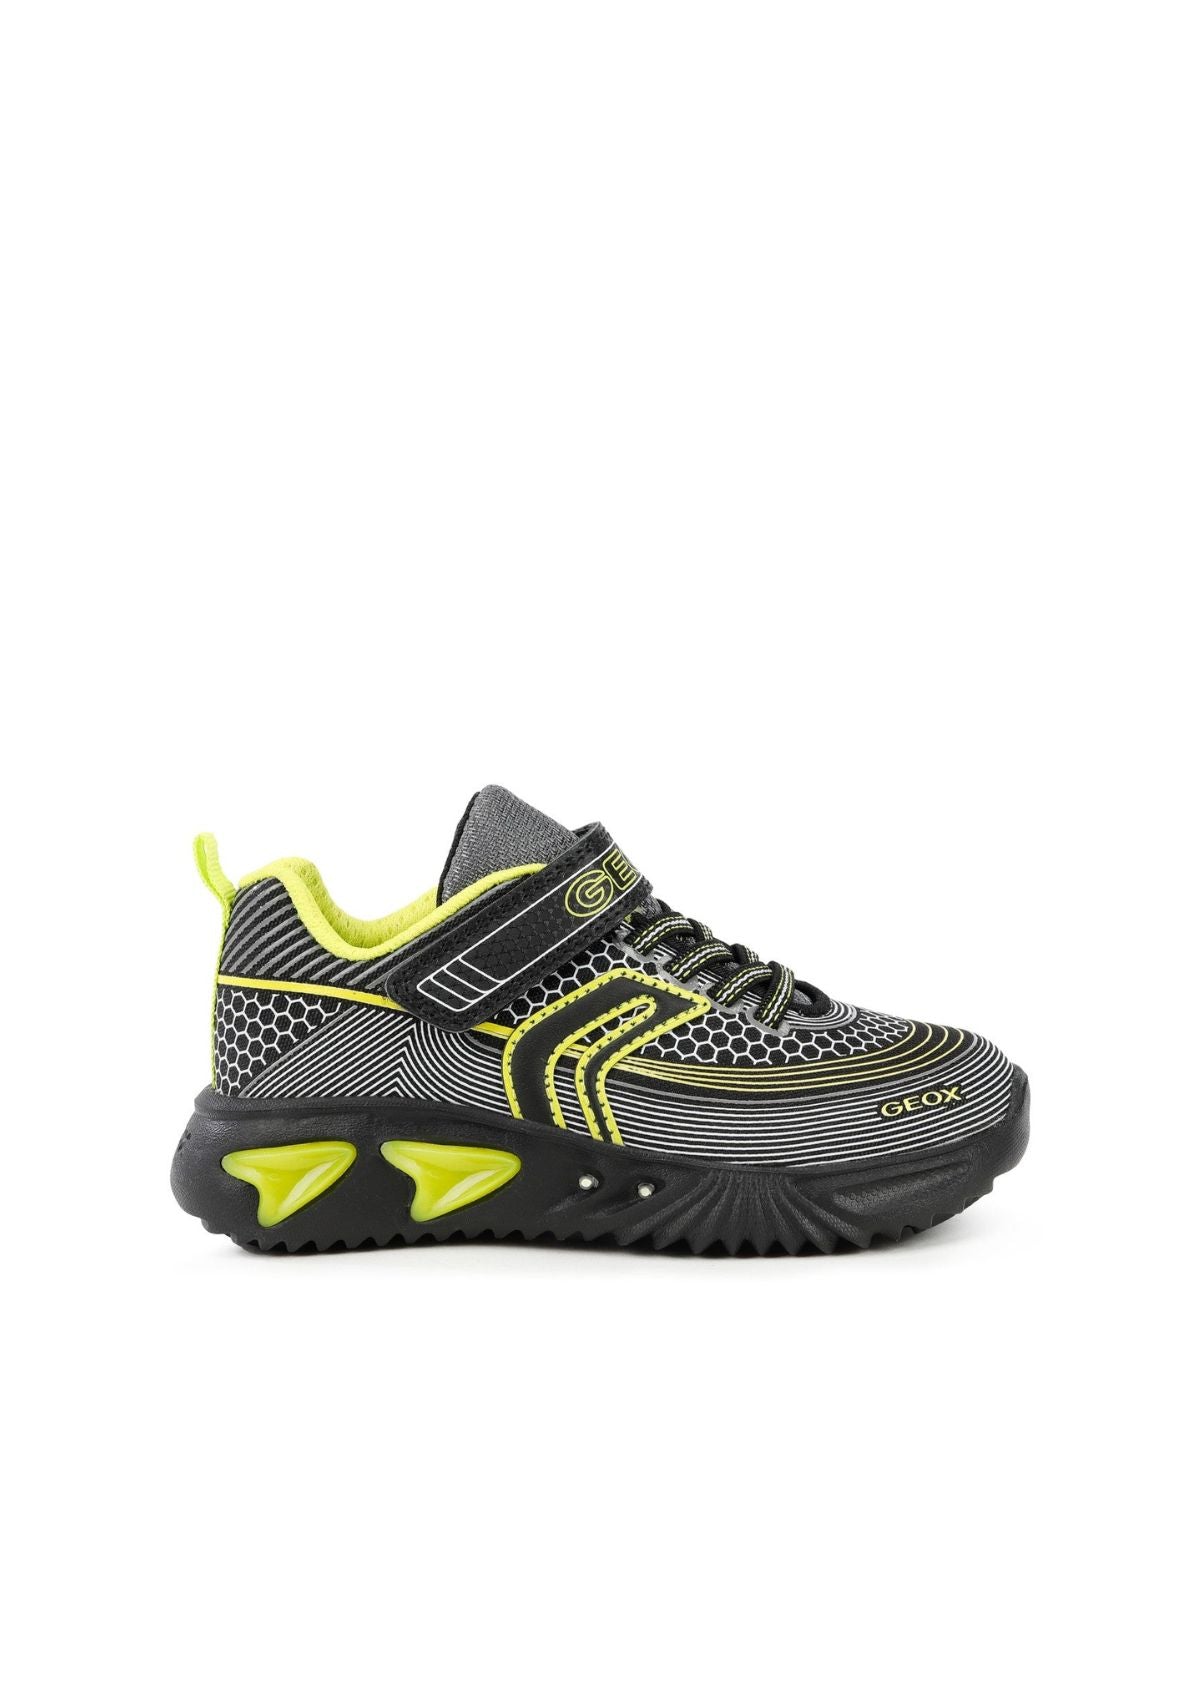 Geox Junior Boys ASSISTERS Black Lime Side